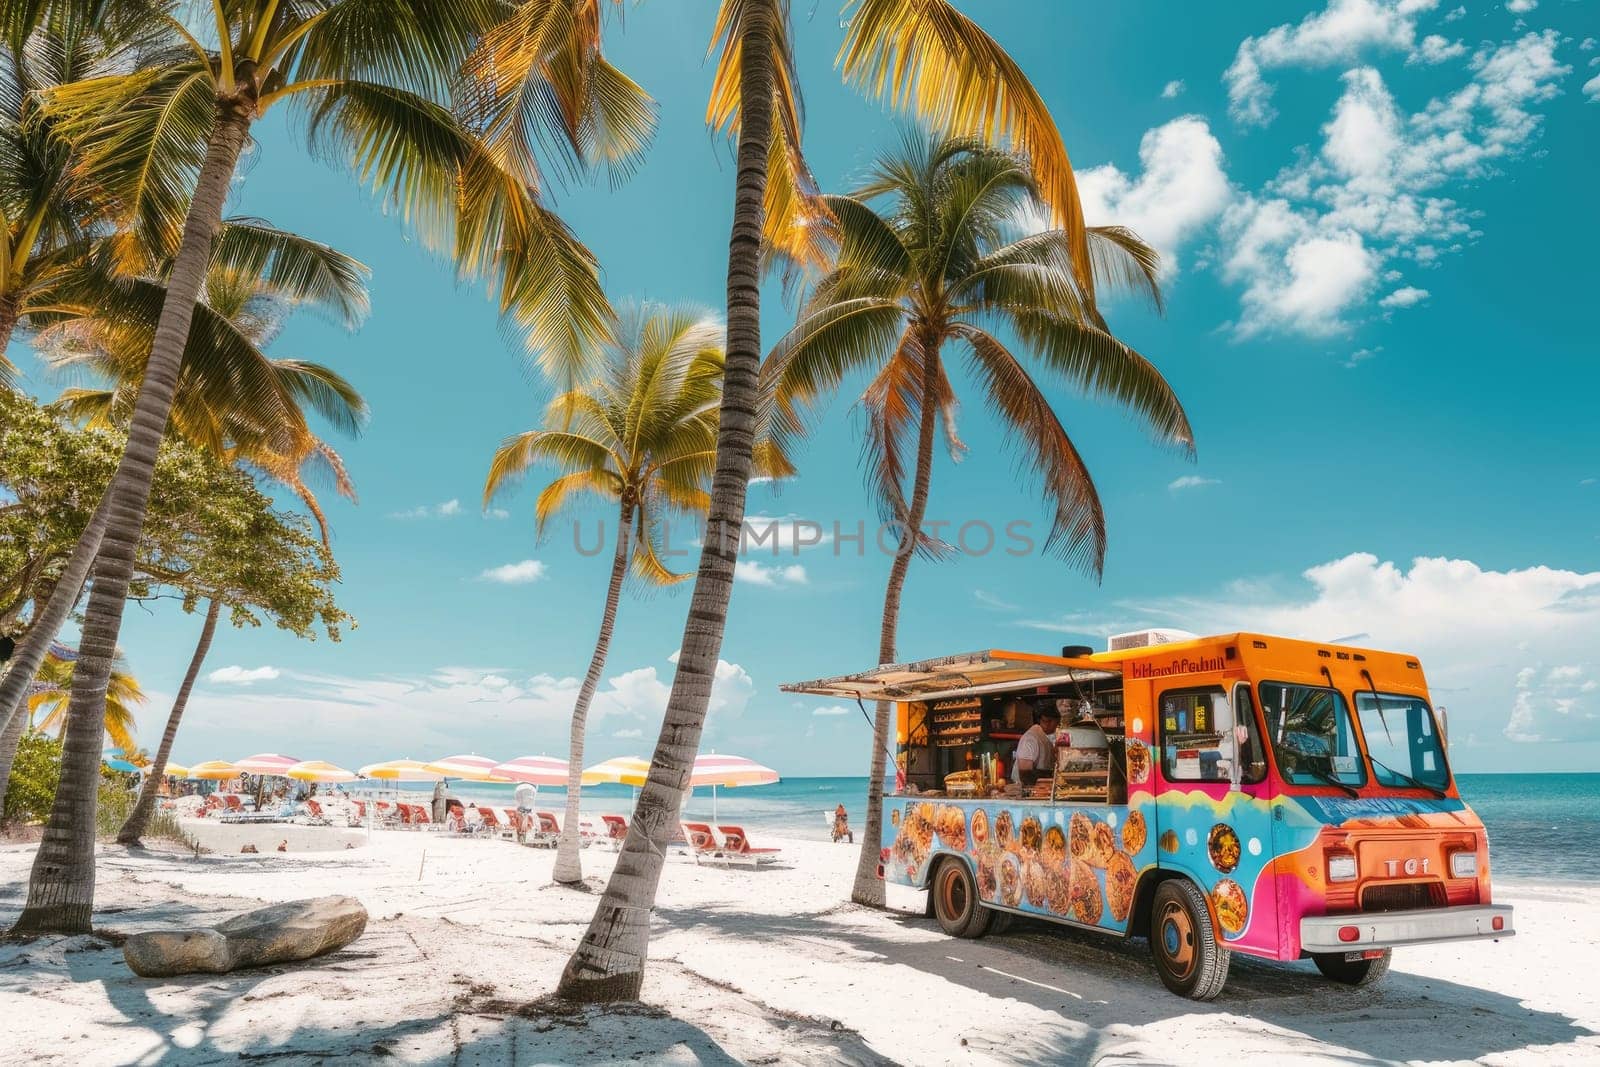 A vibrantly colored food truck serving tacos on a sunny beach, with palm trees swaying and beach. by Chawagen